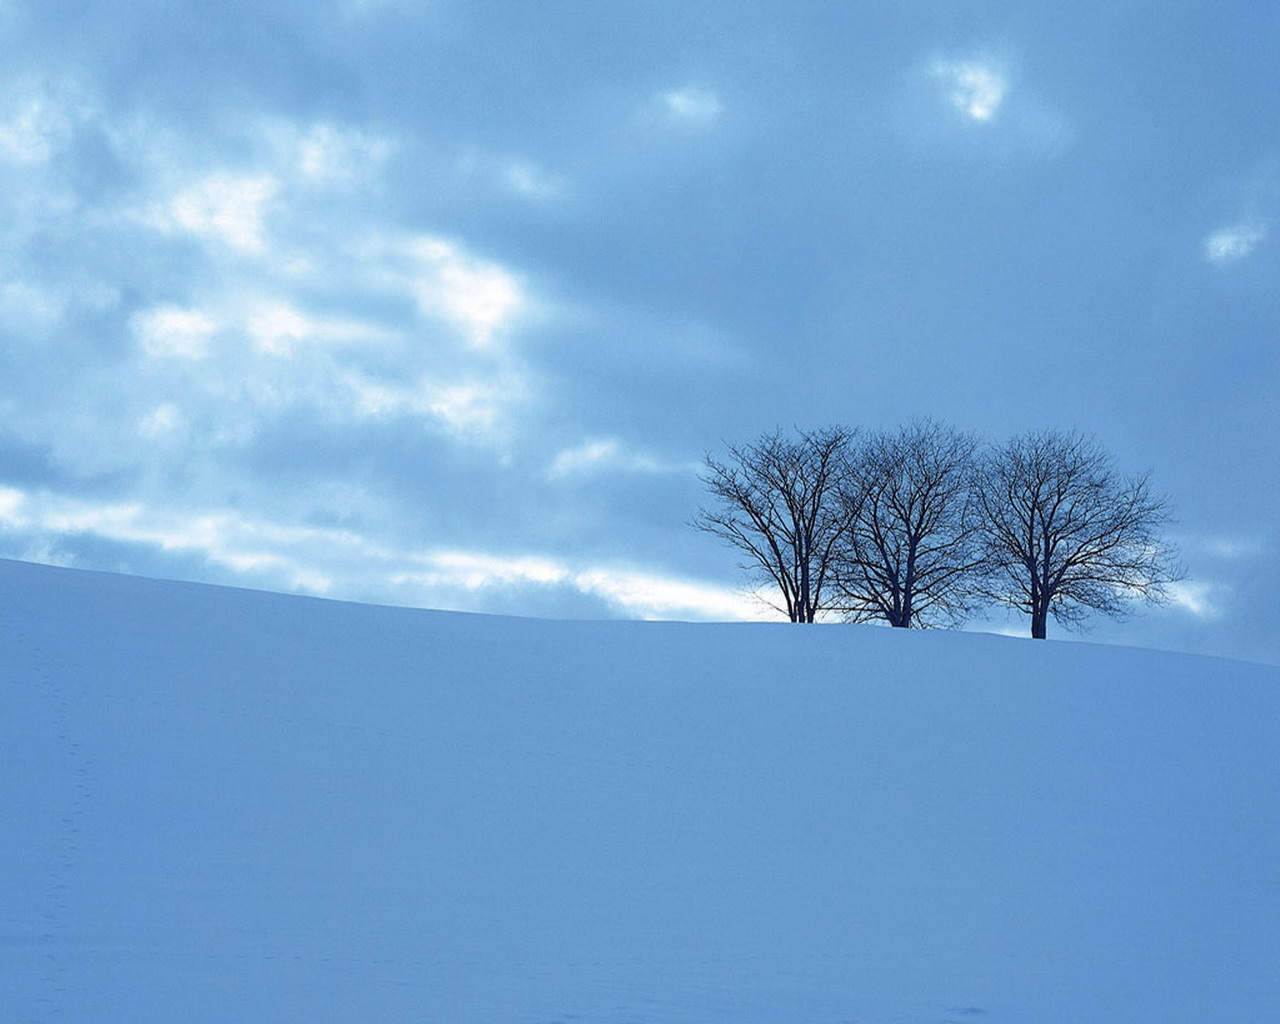 Snow Trees Wallpaper 9088 Hd Wallpapers in Nature   Imagescicom